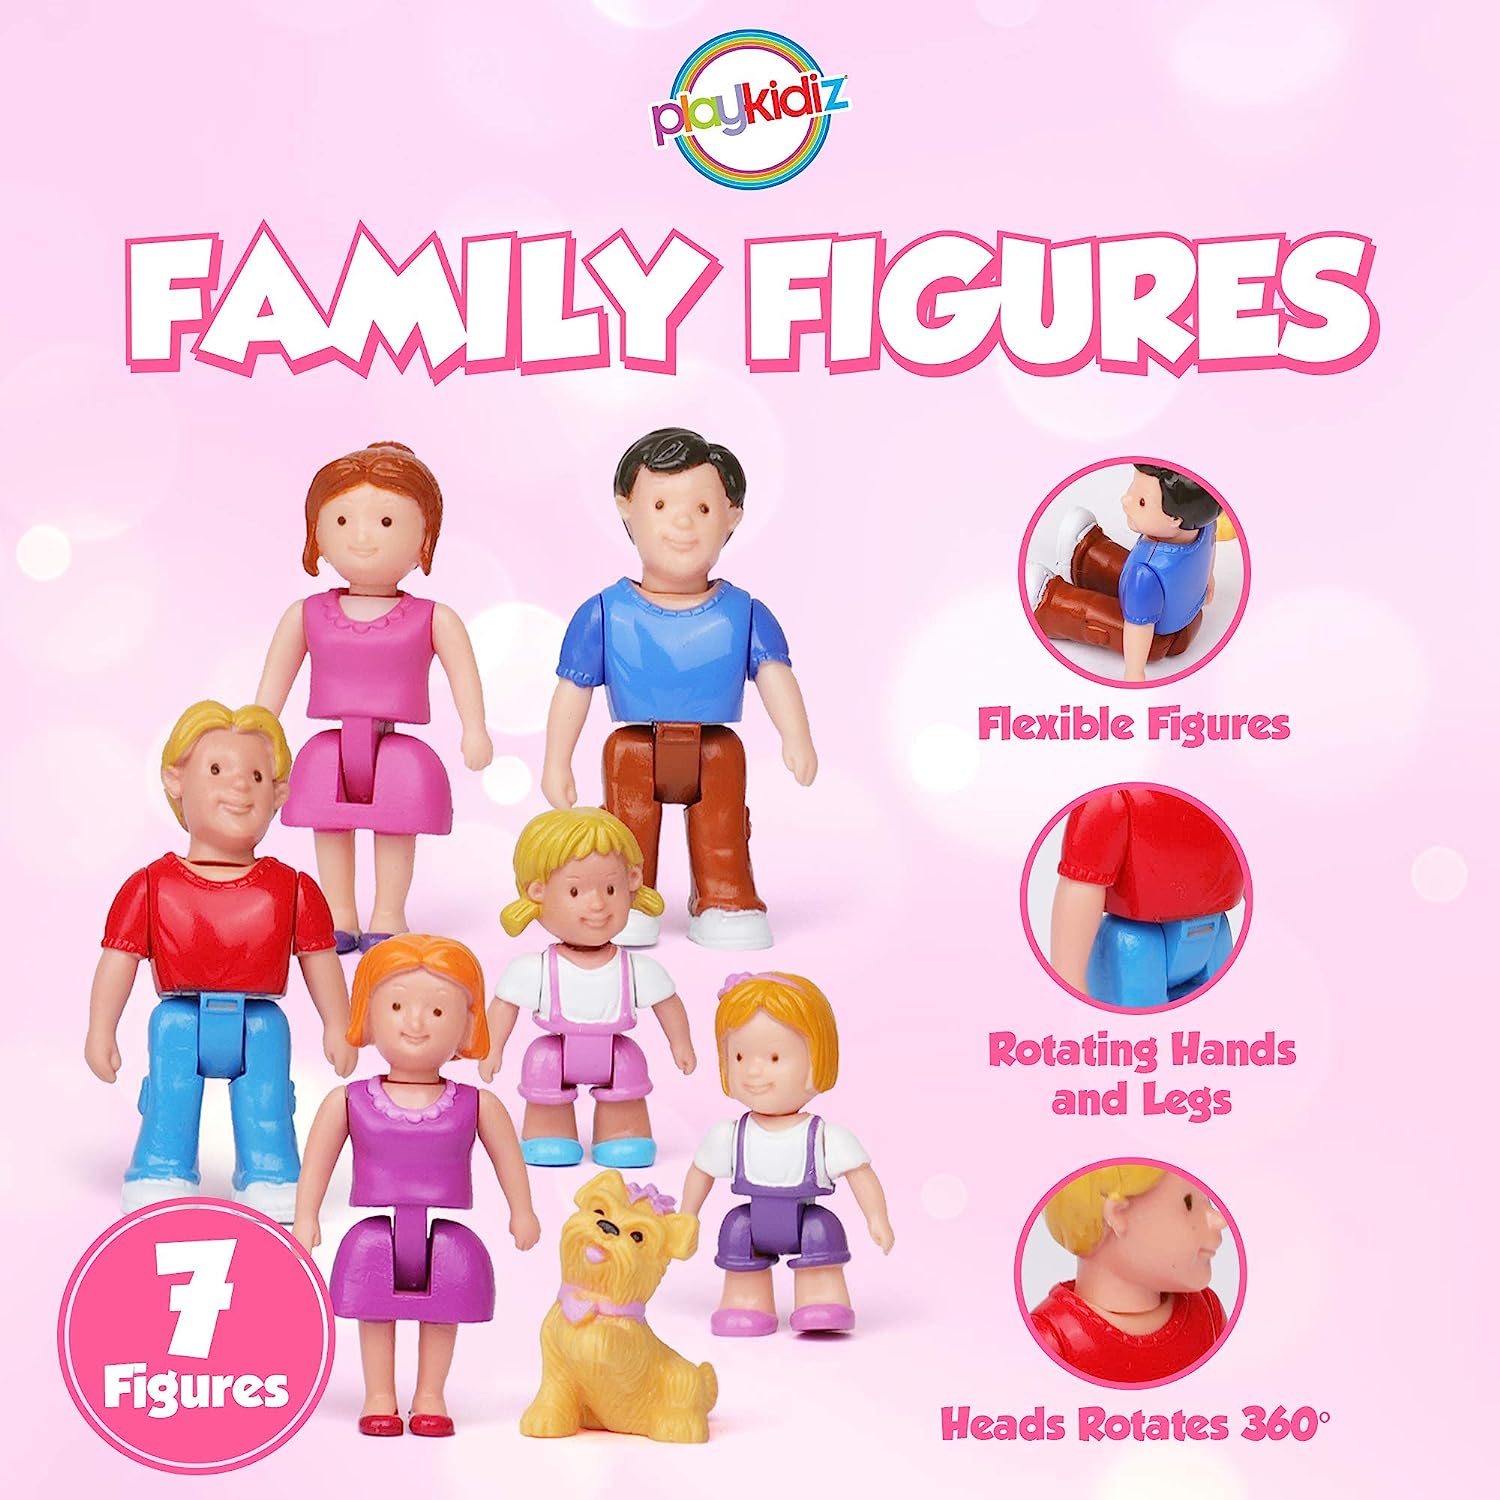 Playkidz Family Figures Dollhouse People Mini Toy Figures for Doll Houses, Set of 7 - image 2 of 7